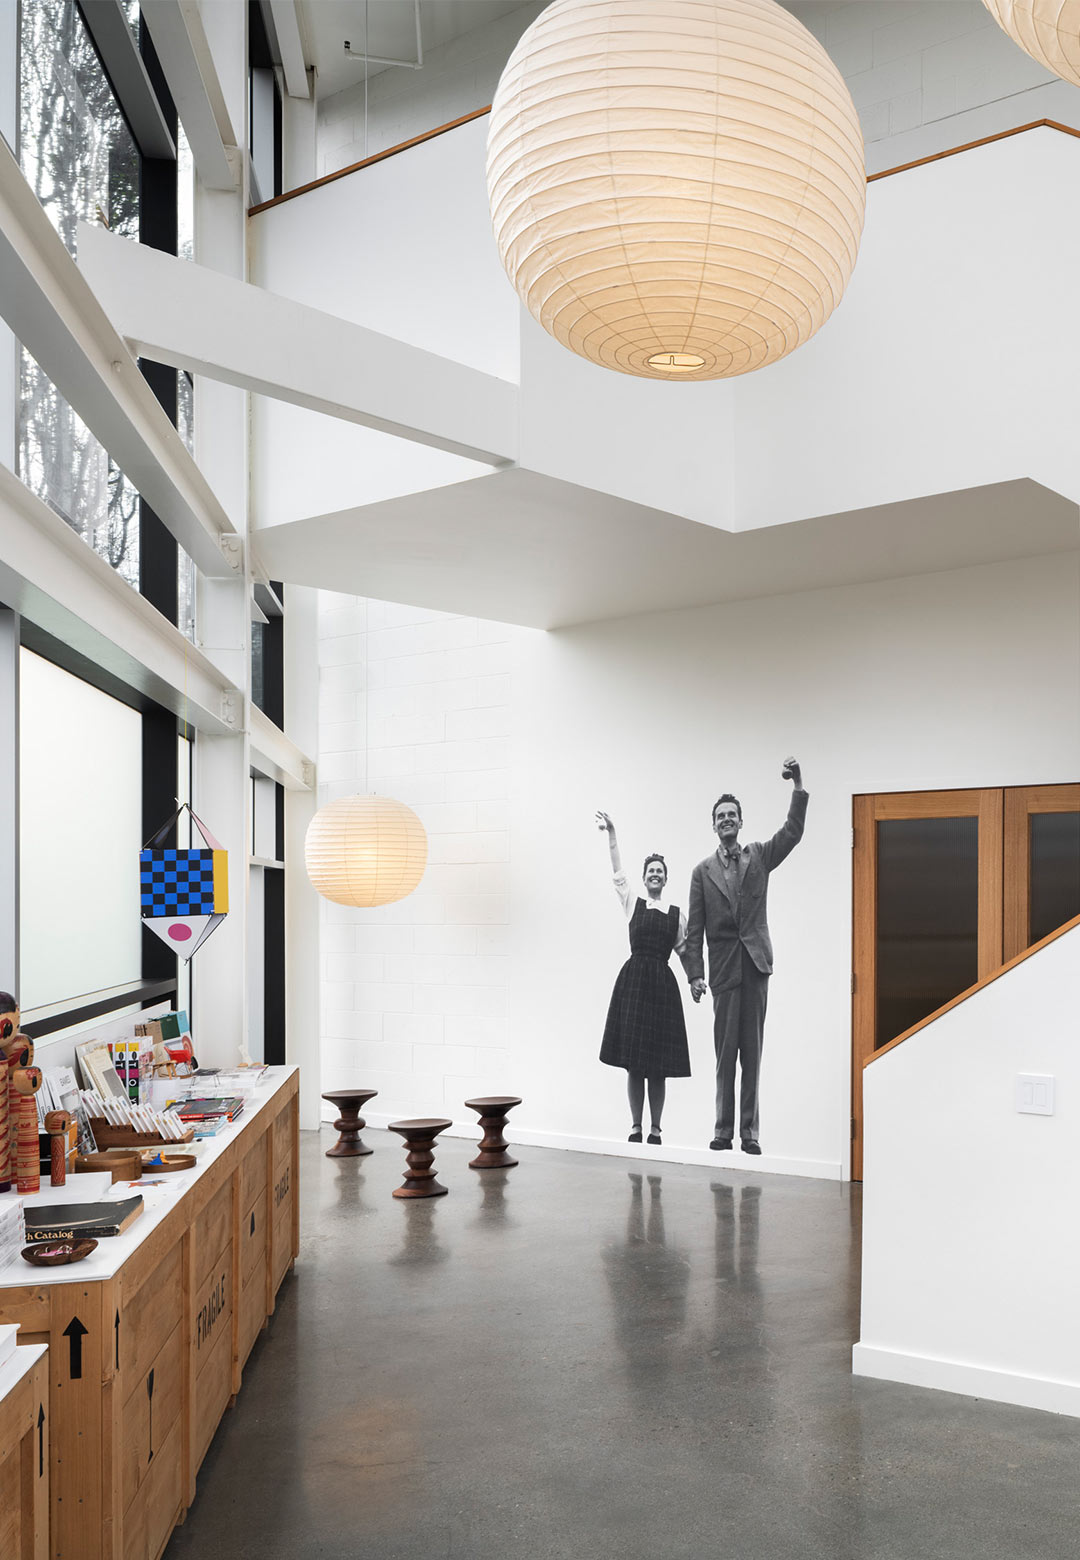 Eames Institute gets a permanent space to showcase its elaborate archival collection